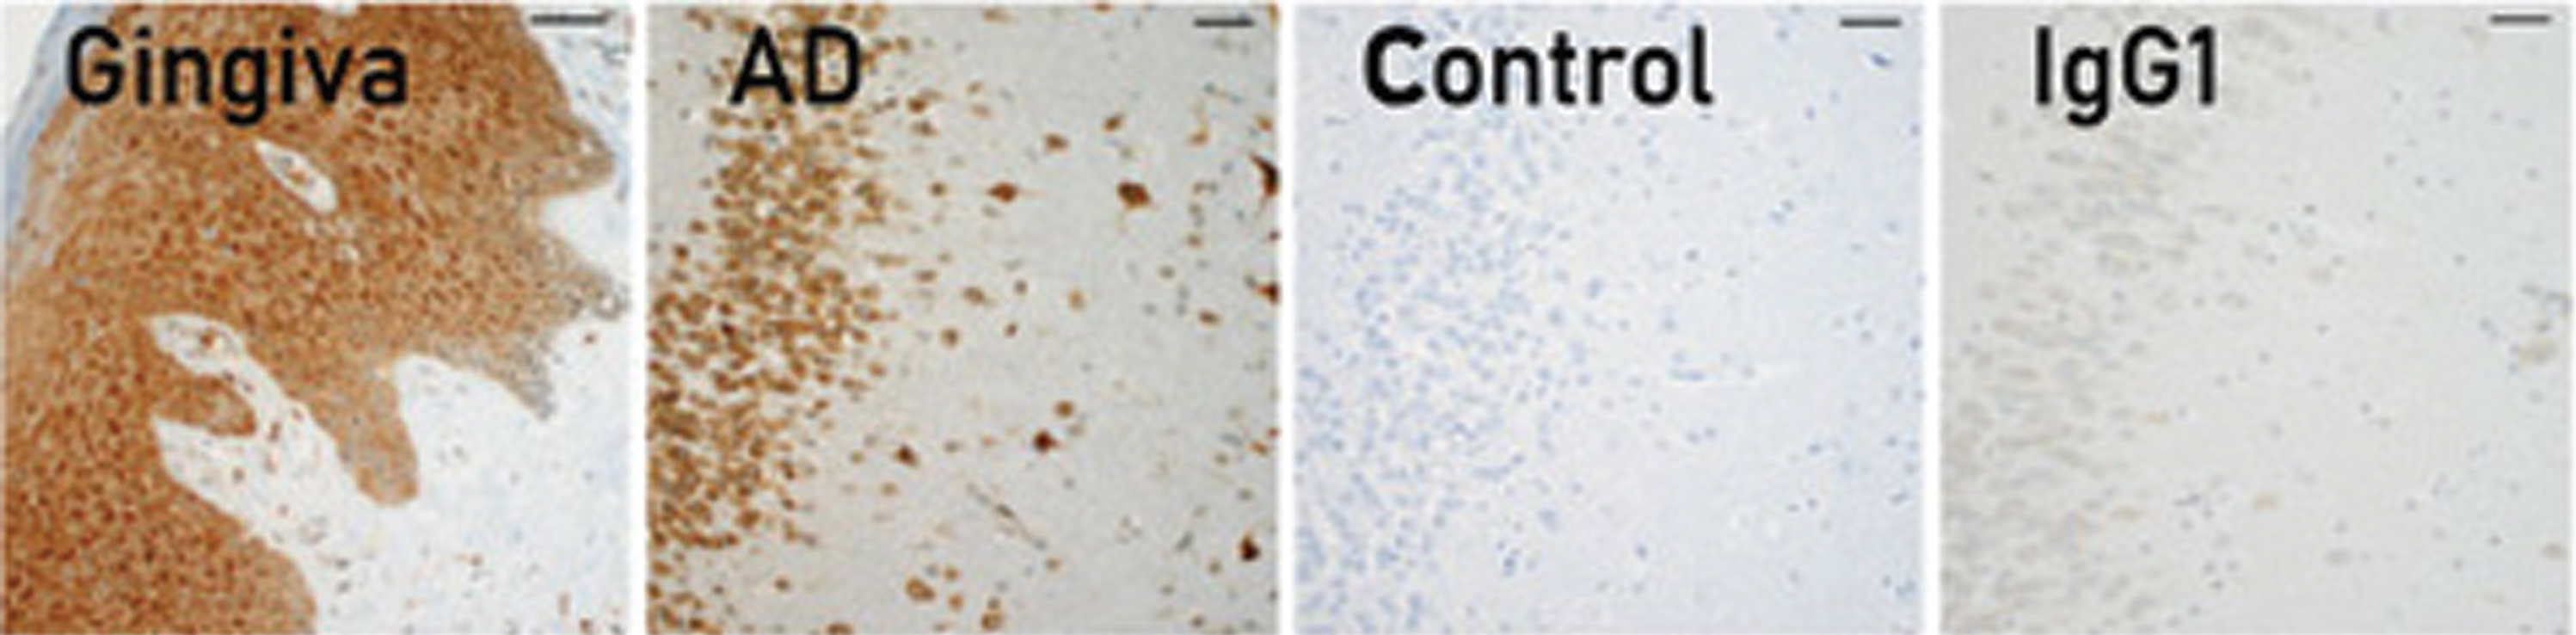 Immunohistochemical localization of gingipains in human gum tissues, AD brain tissues. Adapted with permission from Dominy SS, Lynch C, Ermini F, et al. (2019) Porphyromonas gingivalis in Alzheimer’s disease brains: Evidence for disease causation and treatment with small-molecule inhibitors. Sci Adv 5, eaau3333, under the Creative Commons Attribution license (CC BY 4.0).